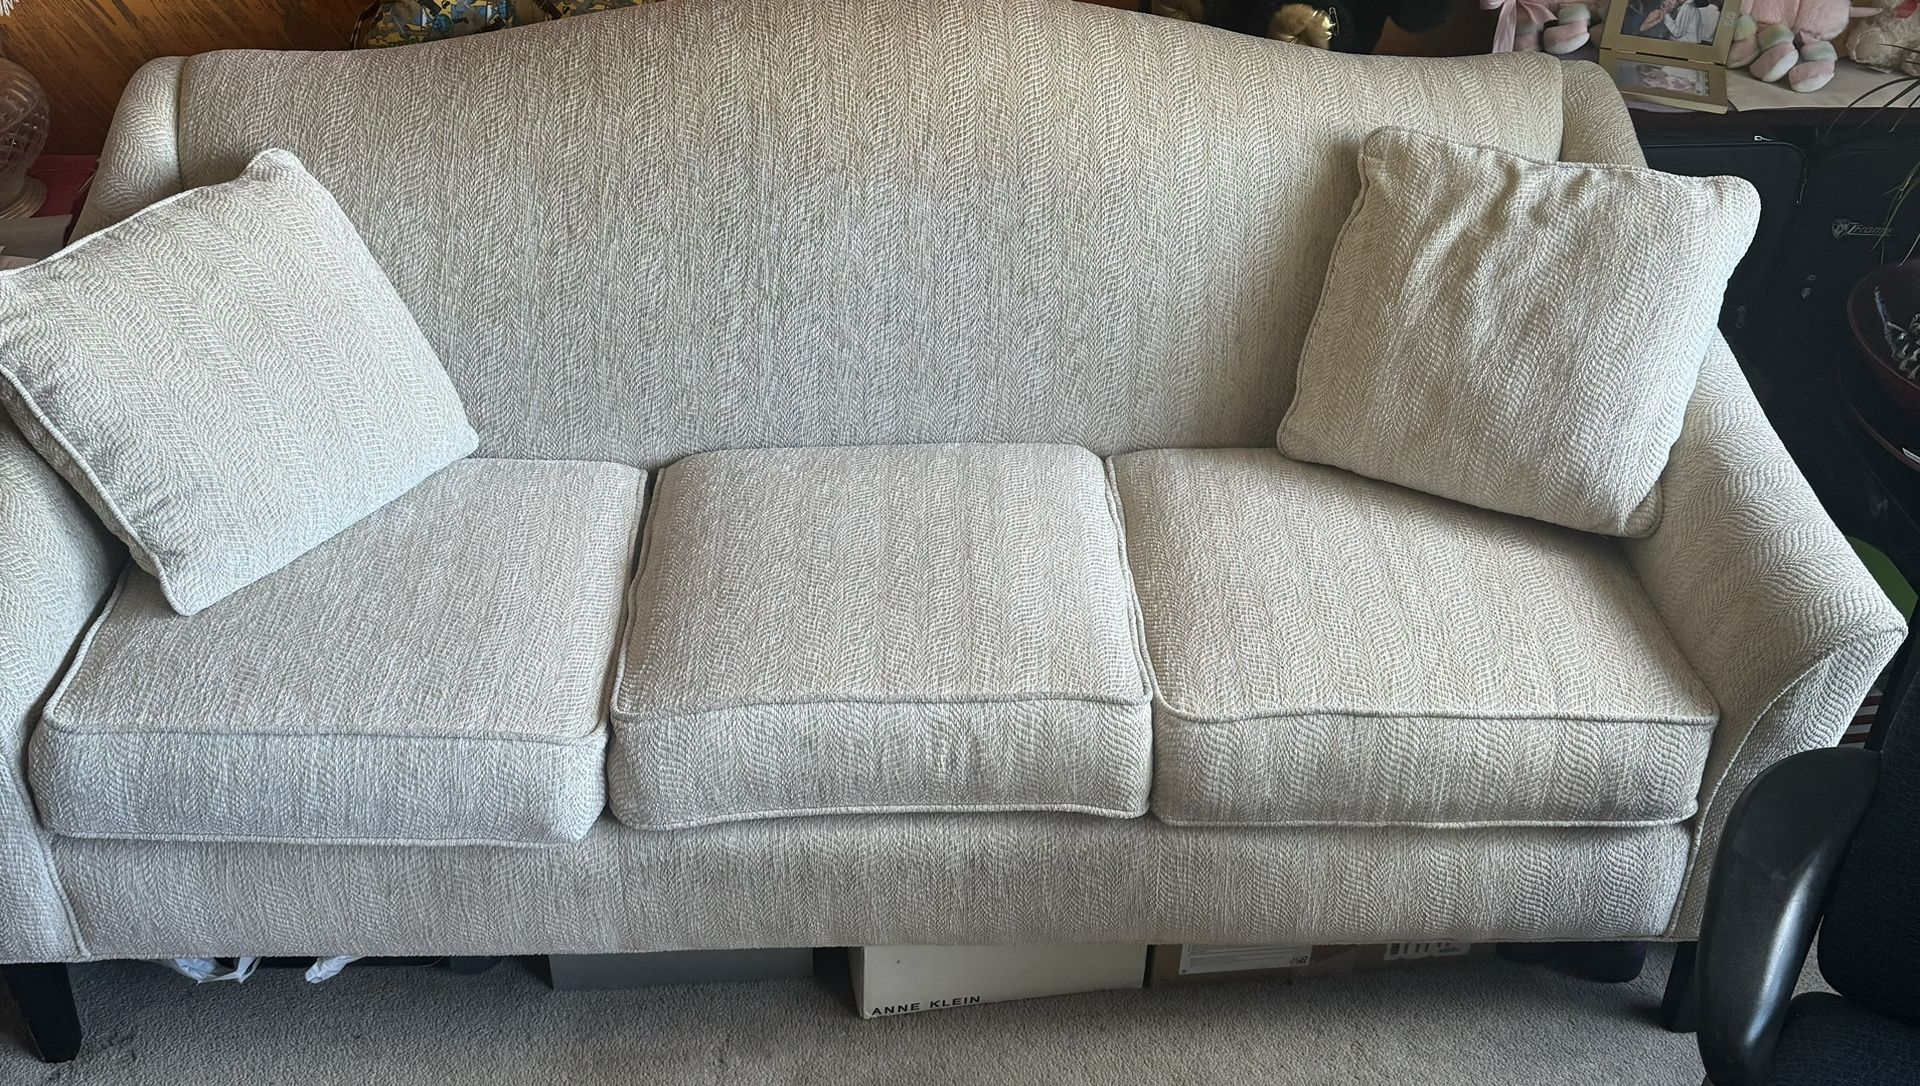 FAIRFIELD Beautiful Very Comfortable Couch, Used 